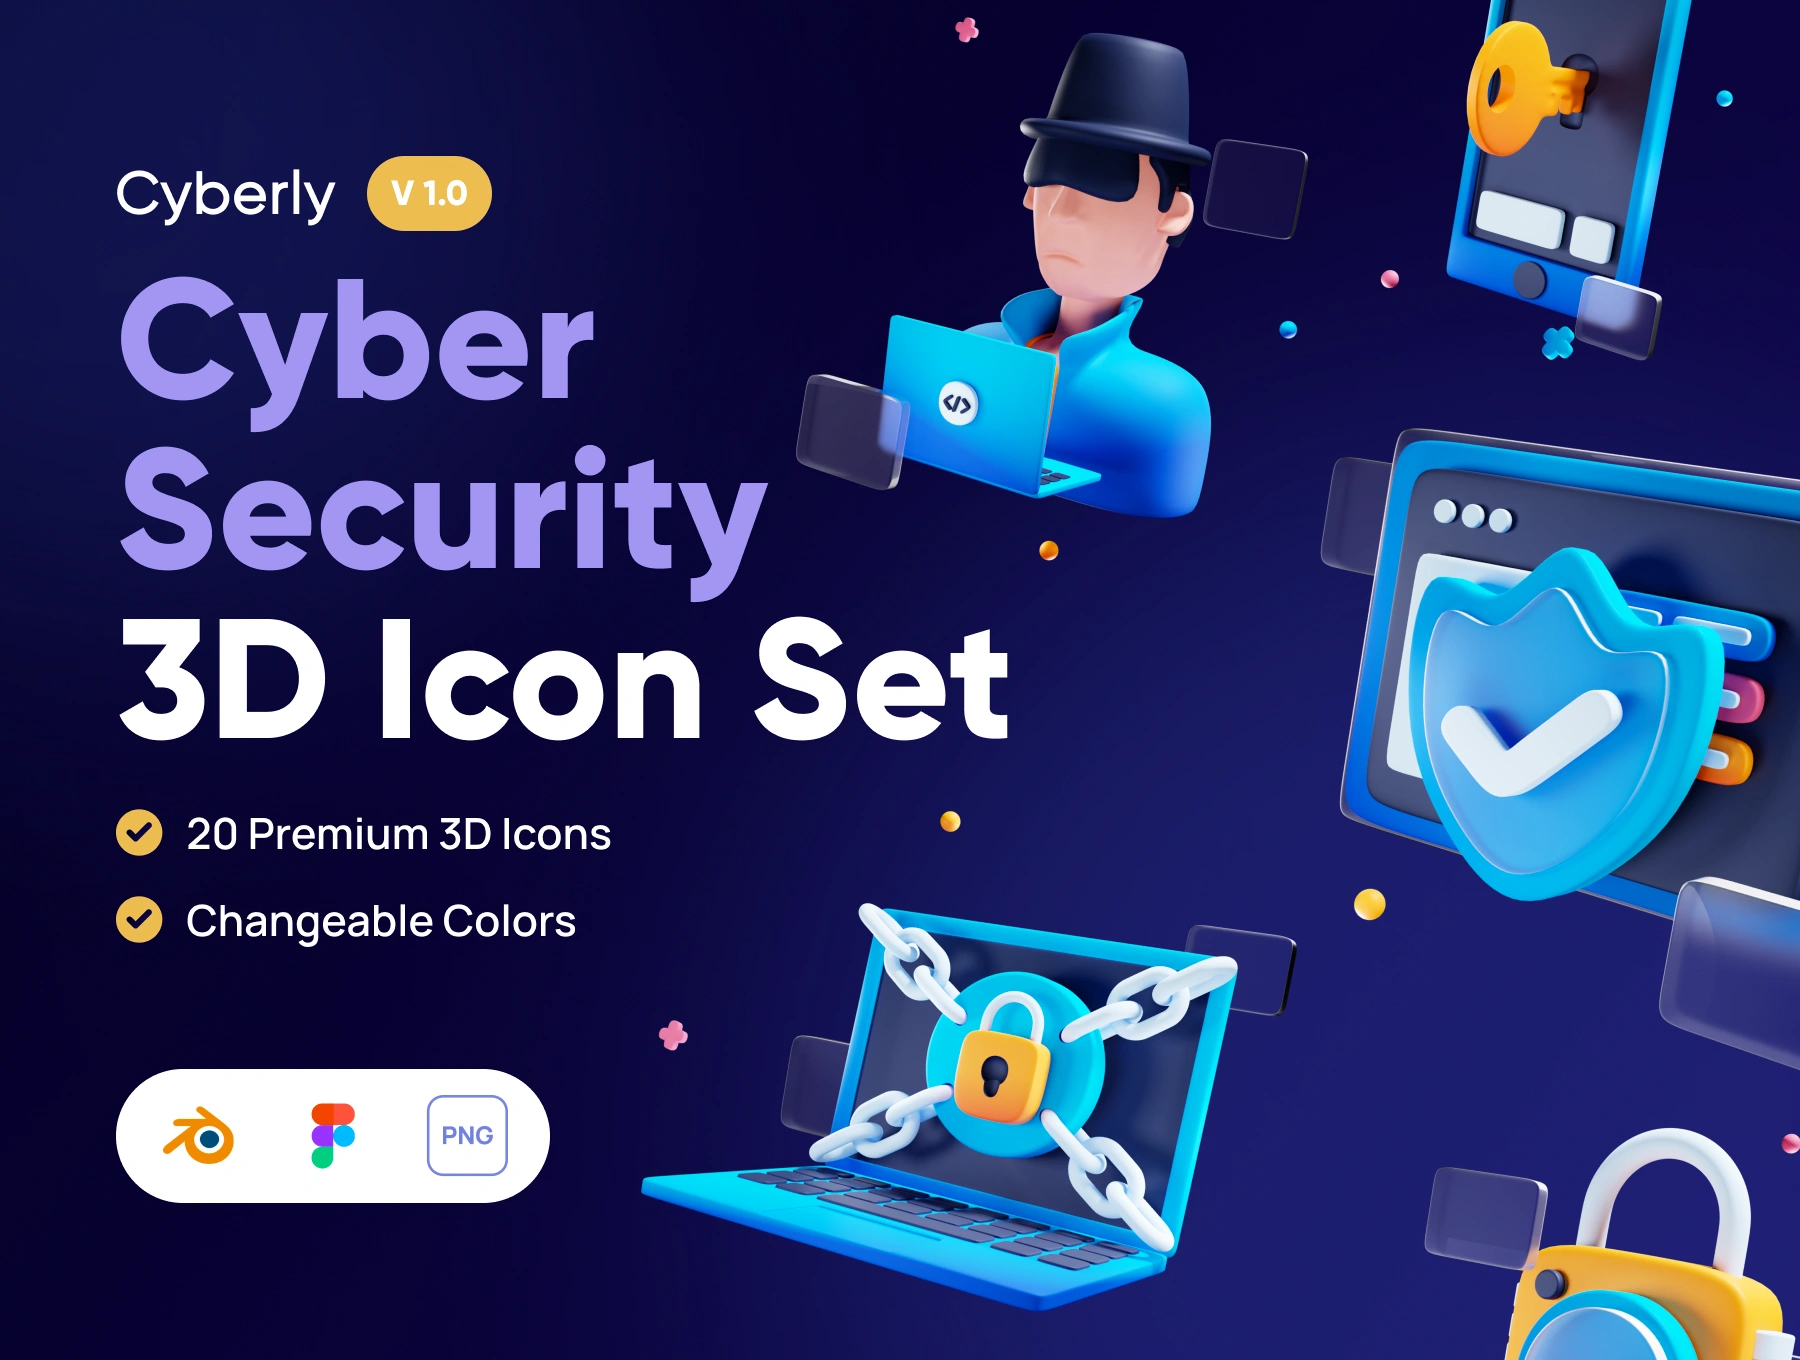 [VIP] Cyberly: Cyber Security 3D Icon Set